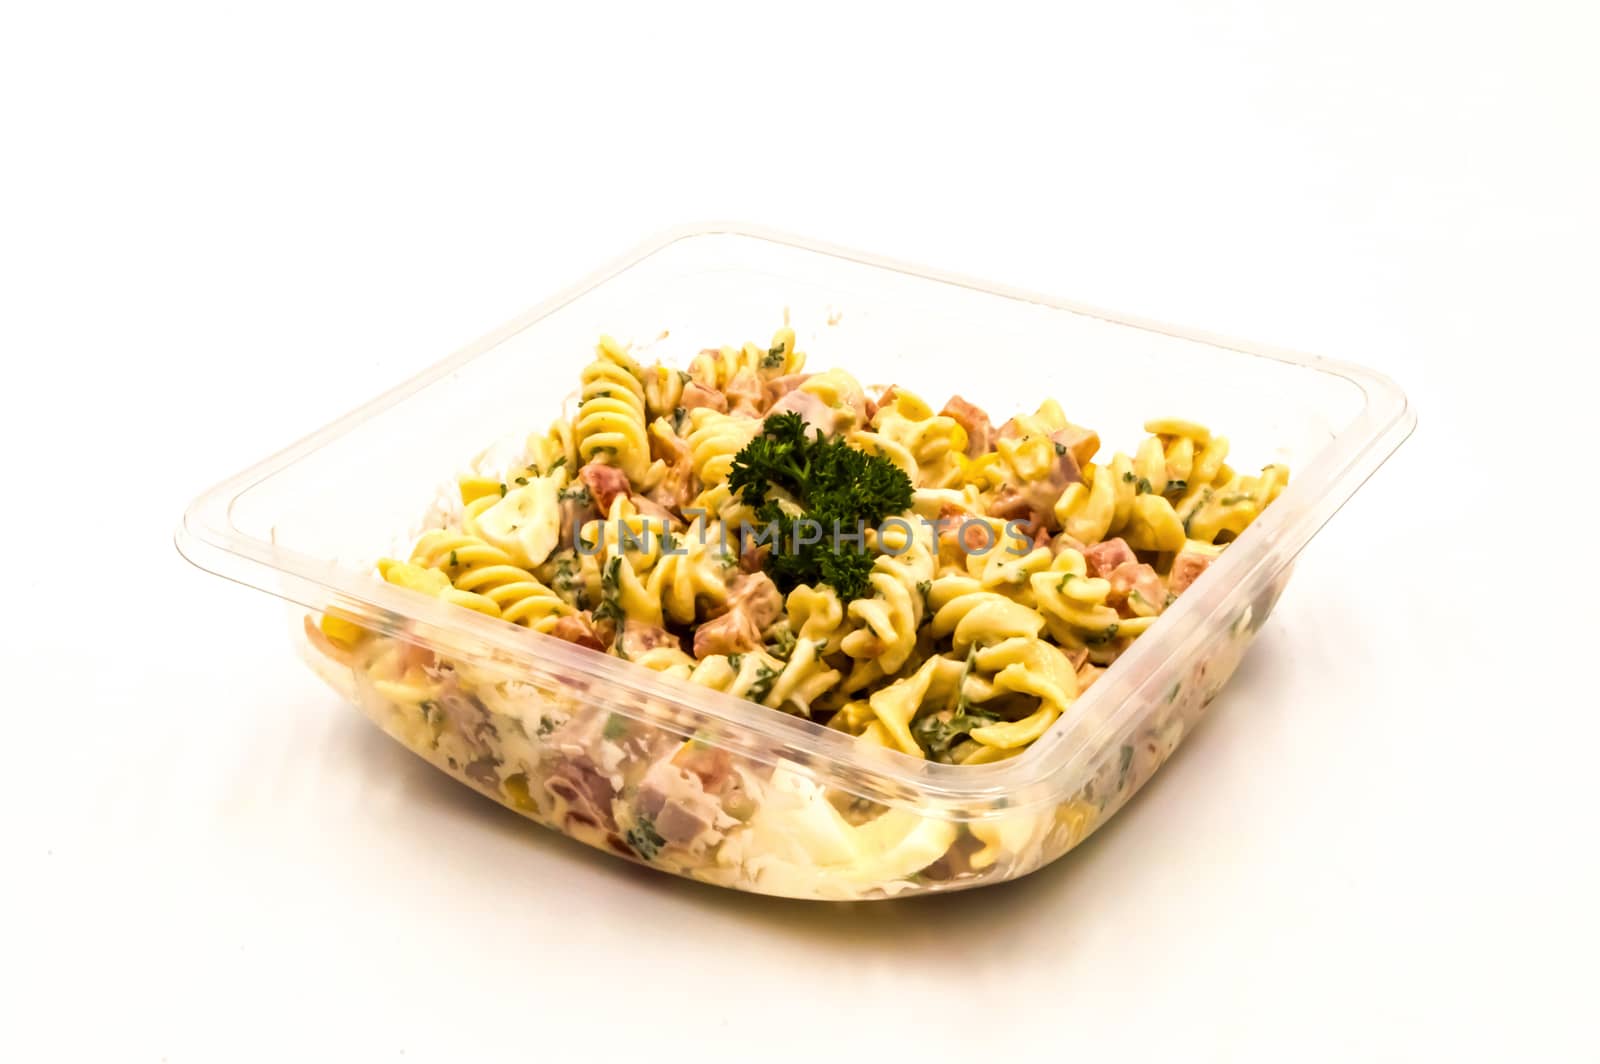 Tray of pasta salad  by Philou1000